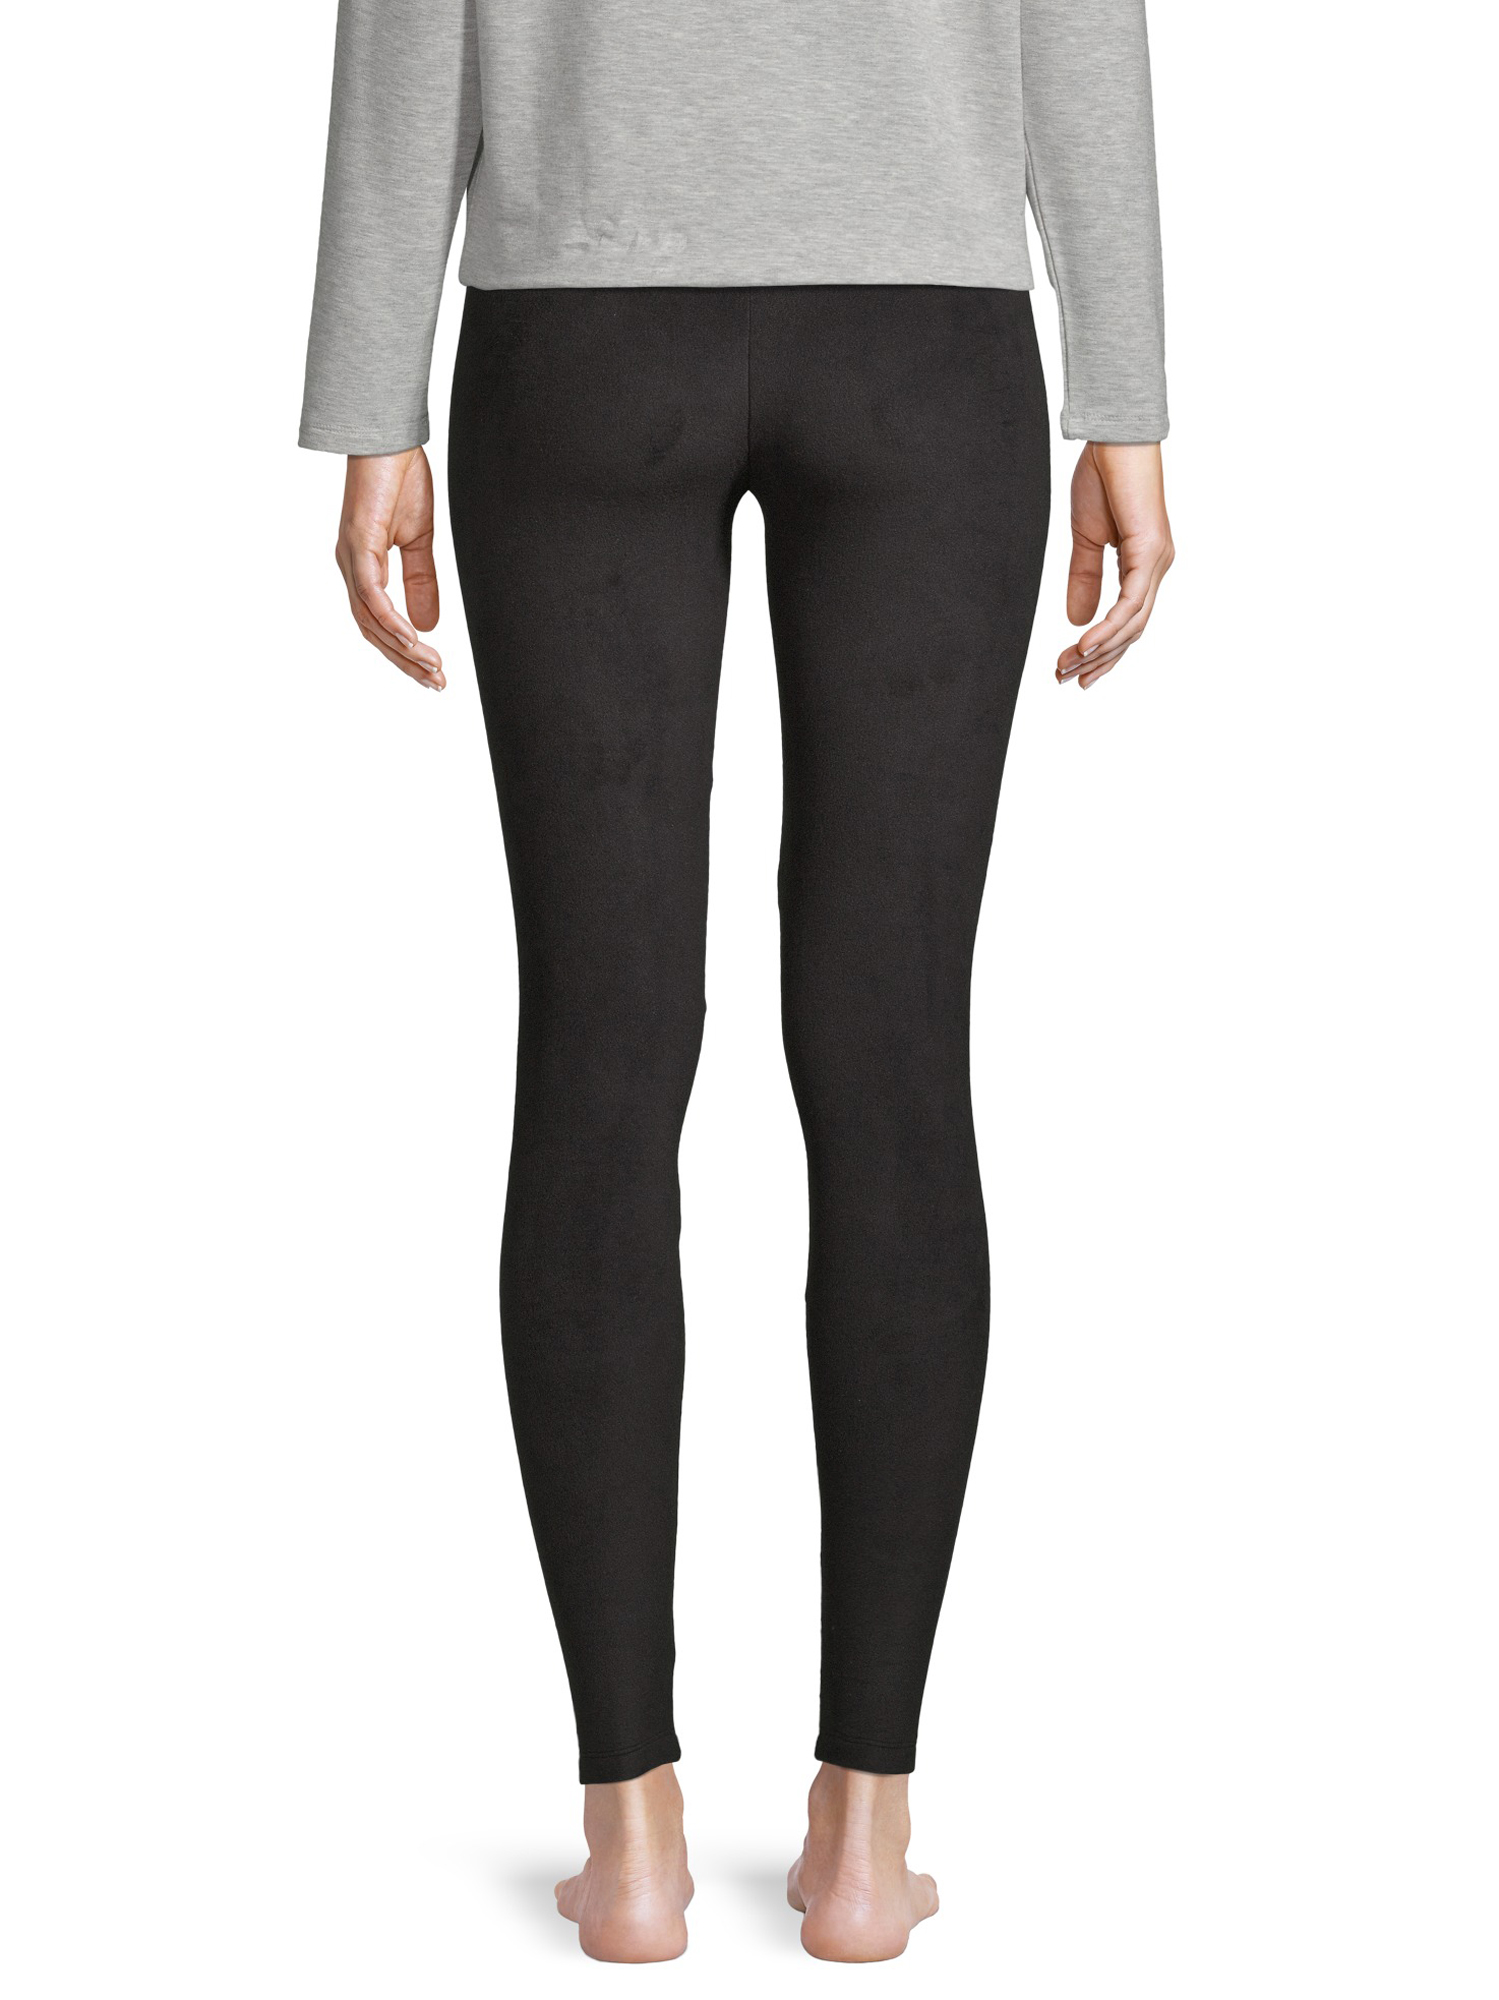 ClimateRight by Cuddl Duds Women's Stretch Fleece Base Layer Natural Rise Thermal Leggings - image 7 of 7